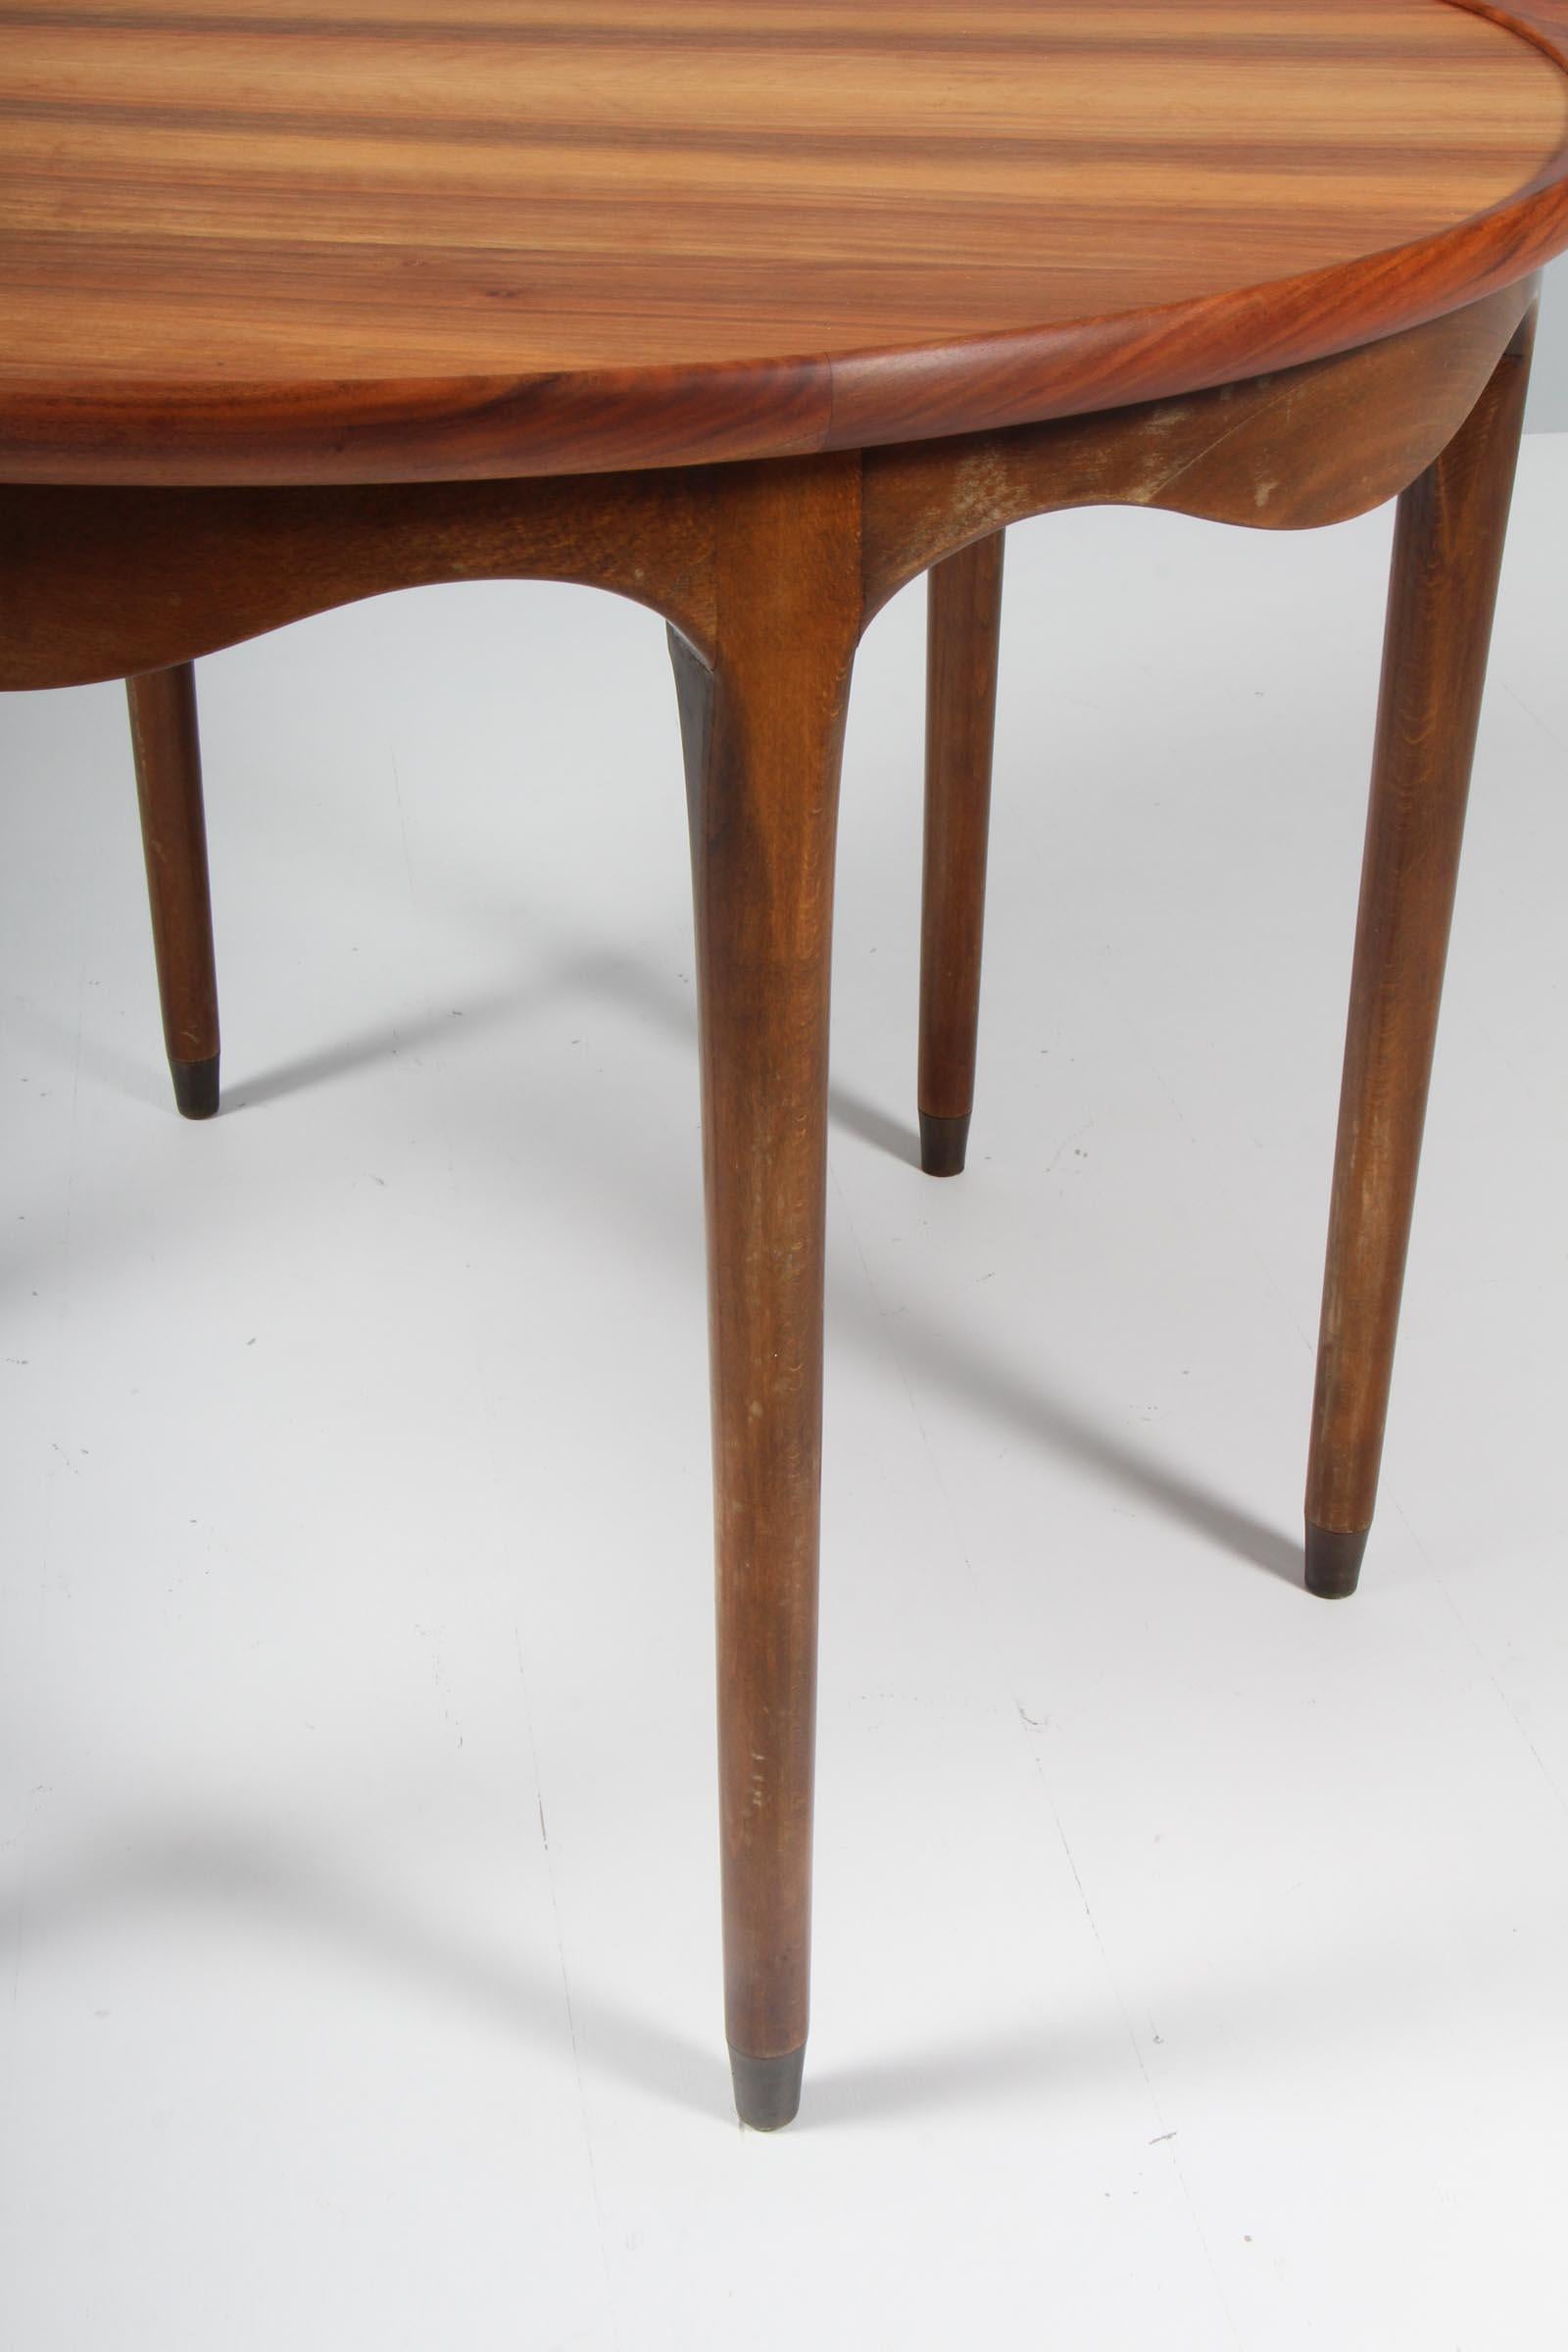 Mid-20th Century William Watting Coffee Table in Nutwood, 1950s, Brass Details